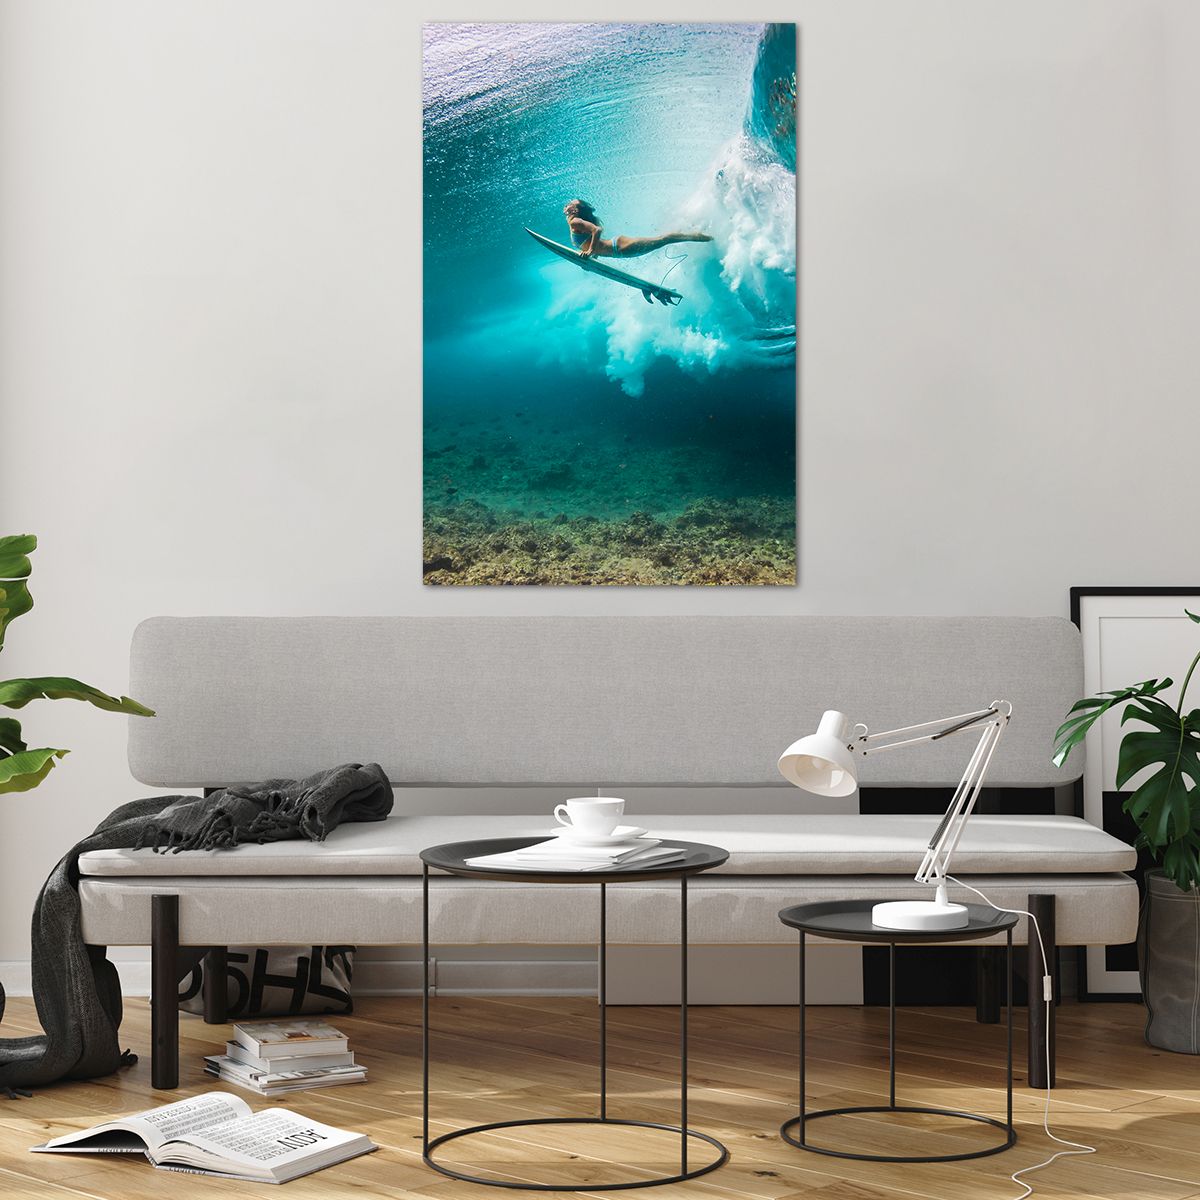 Glass picture  Surfing, Glass picture  Underwater World, Glass picture  Woman, Glass picture  Ocean, Glass picture  Sport